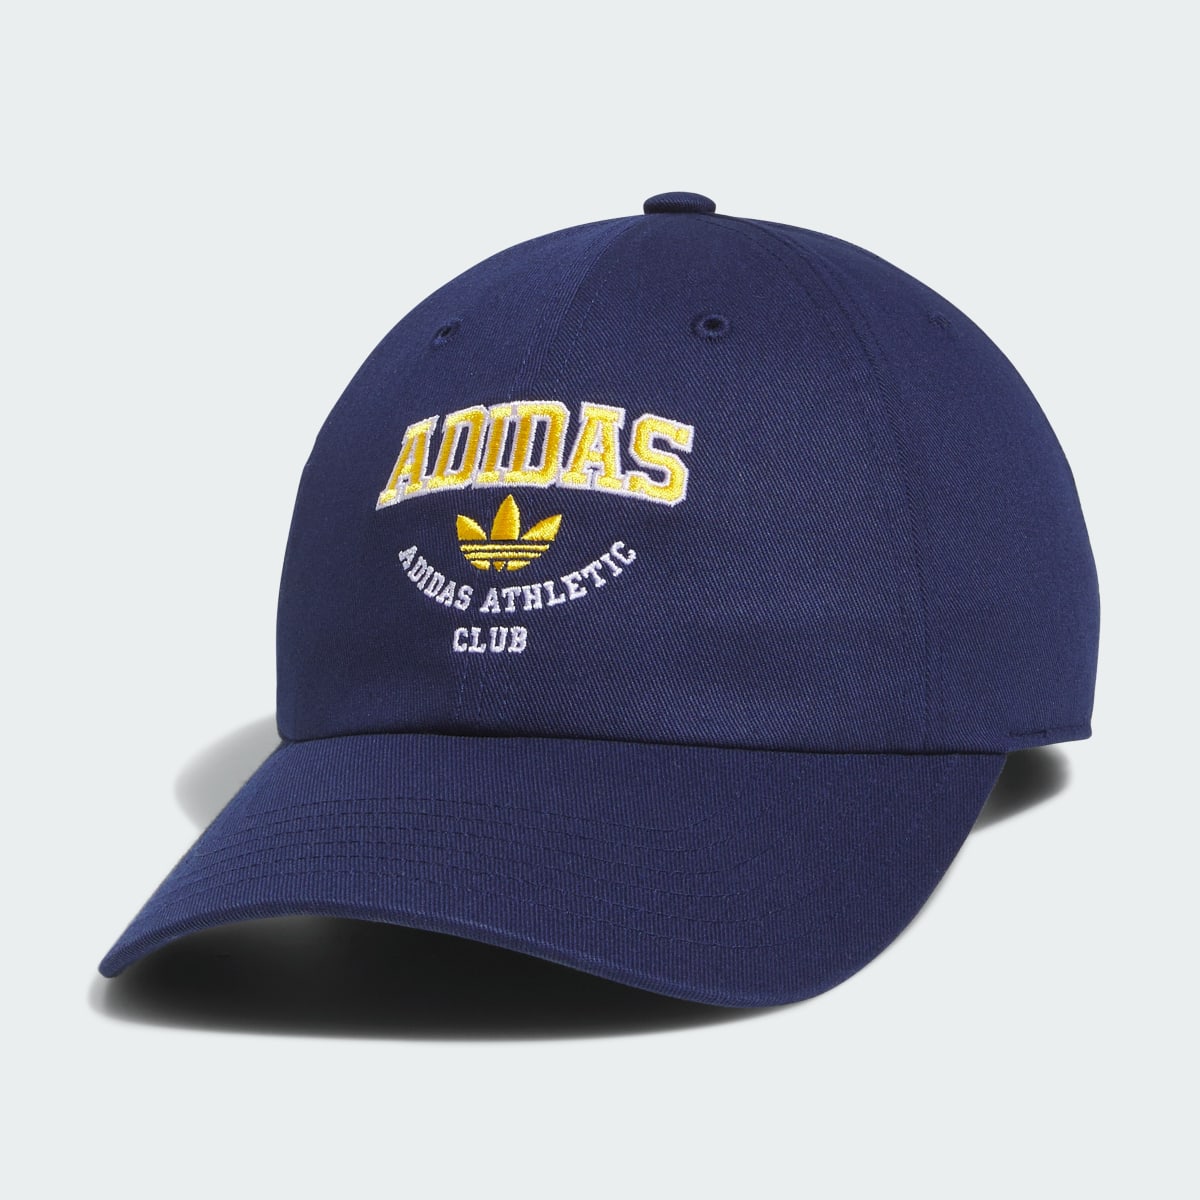 Adidas Collegiate Relaxed Strapback Hat. 4